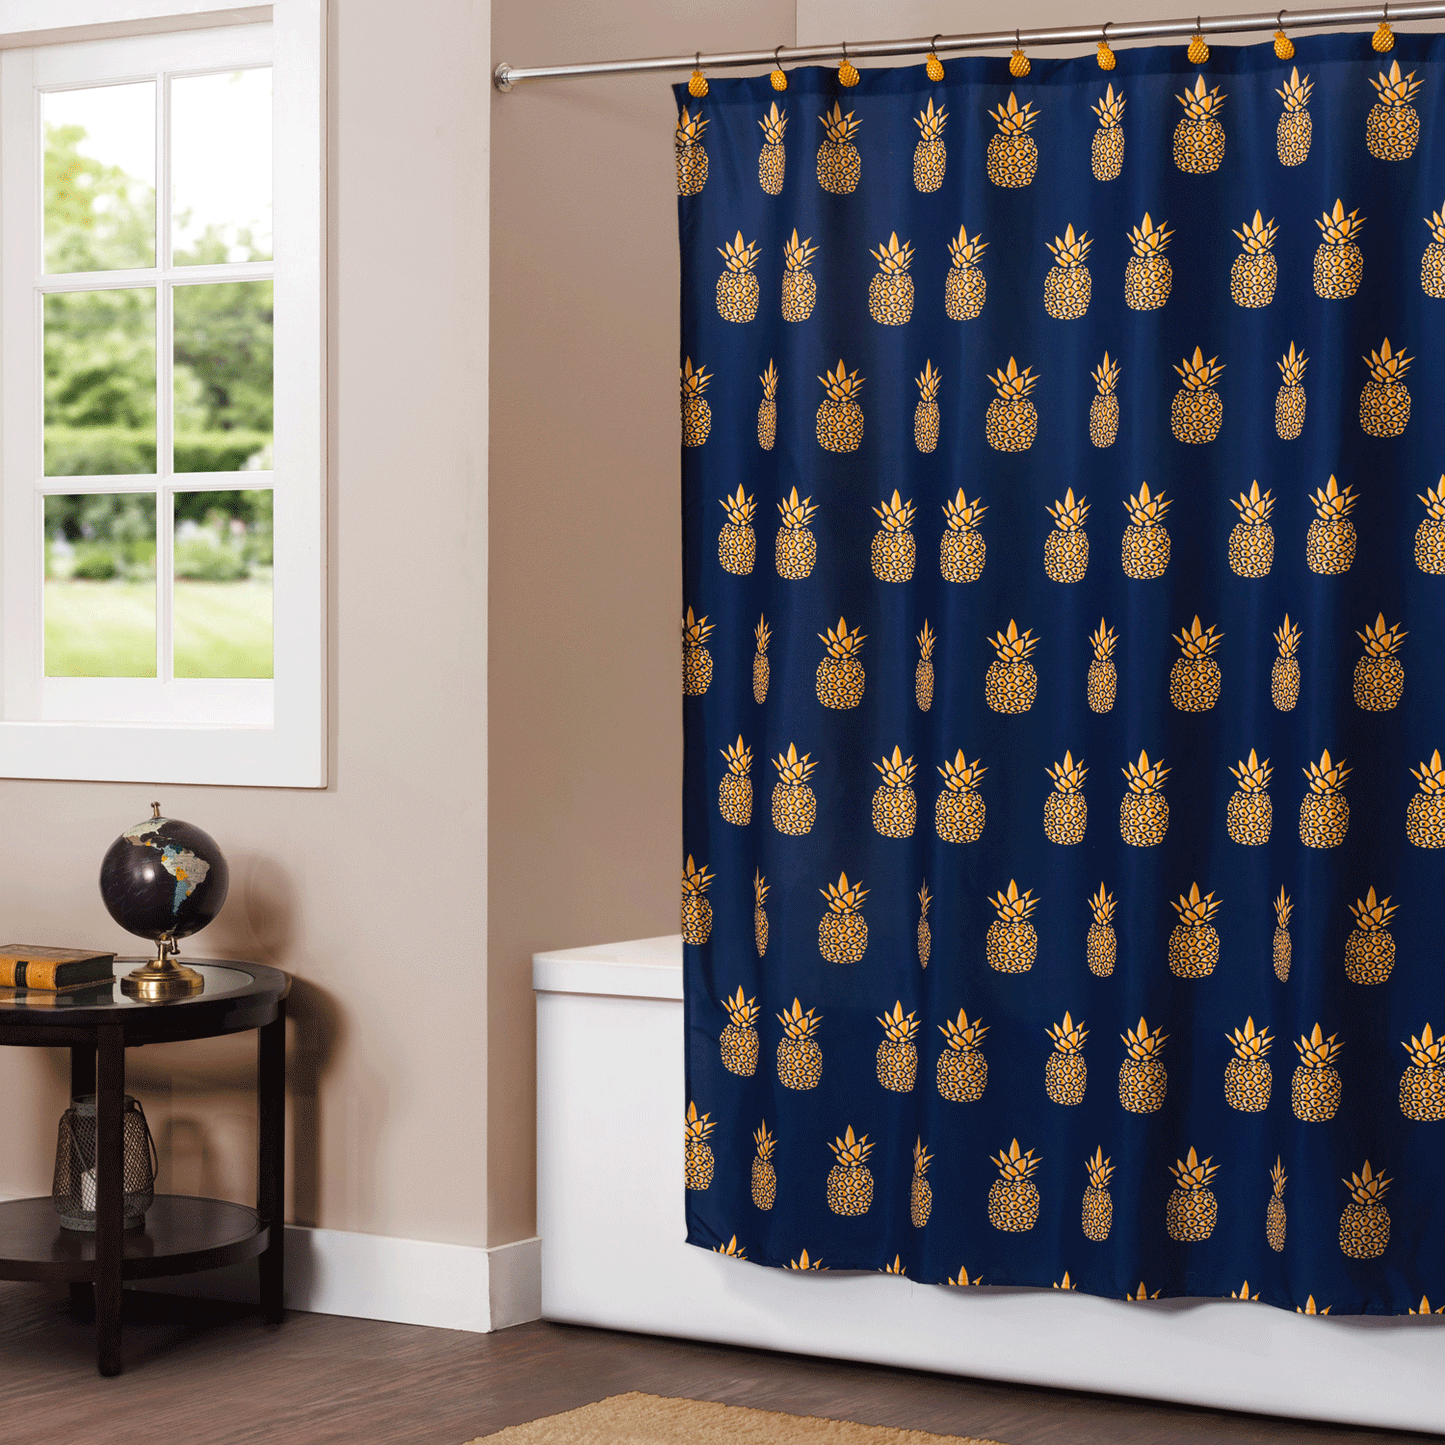 Gilded Fabric Shower Curtain